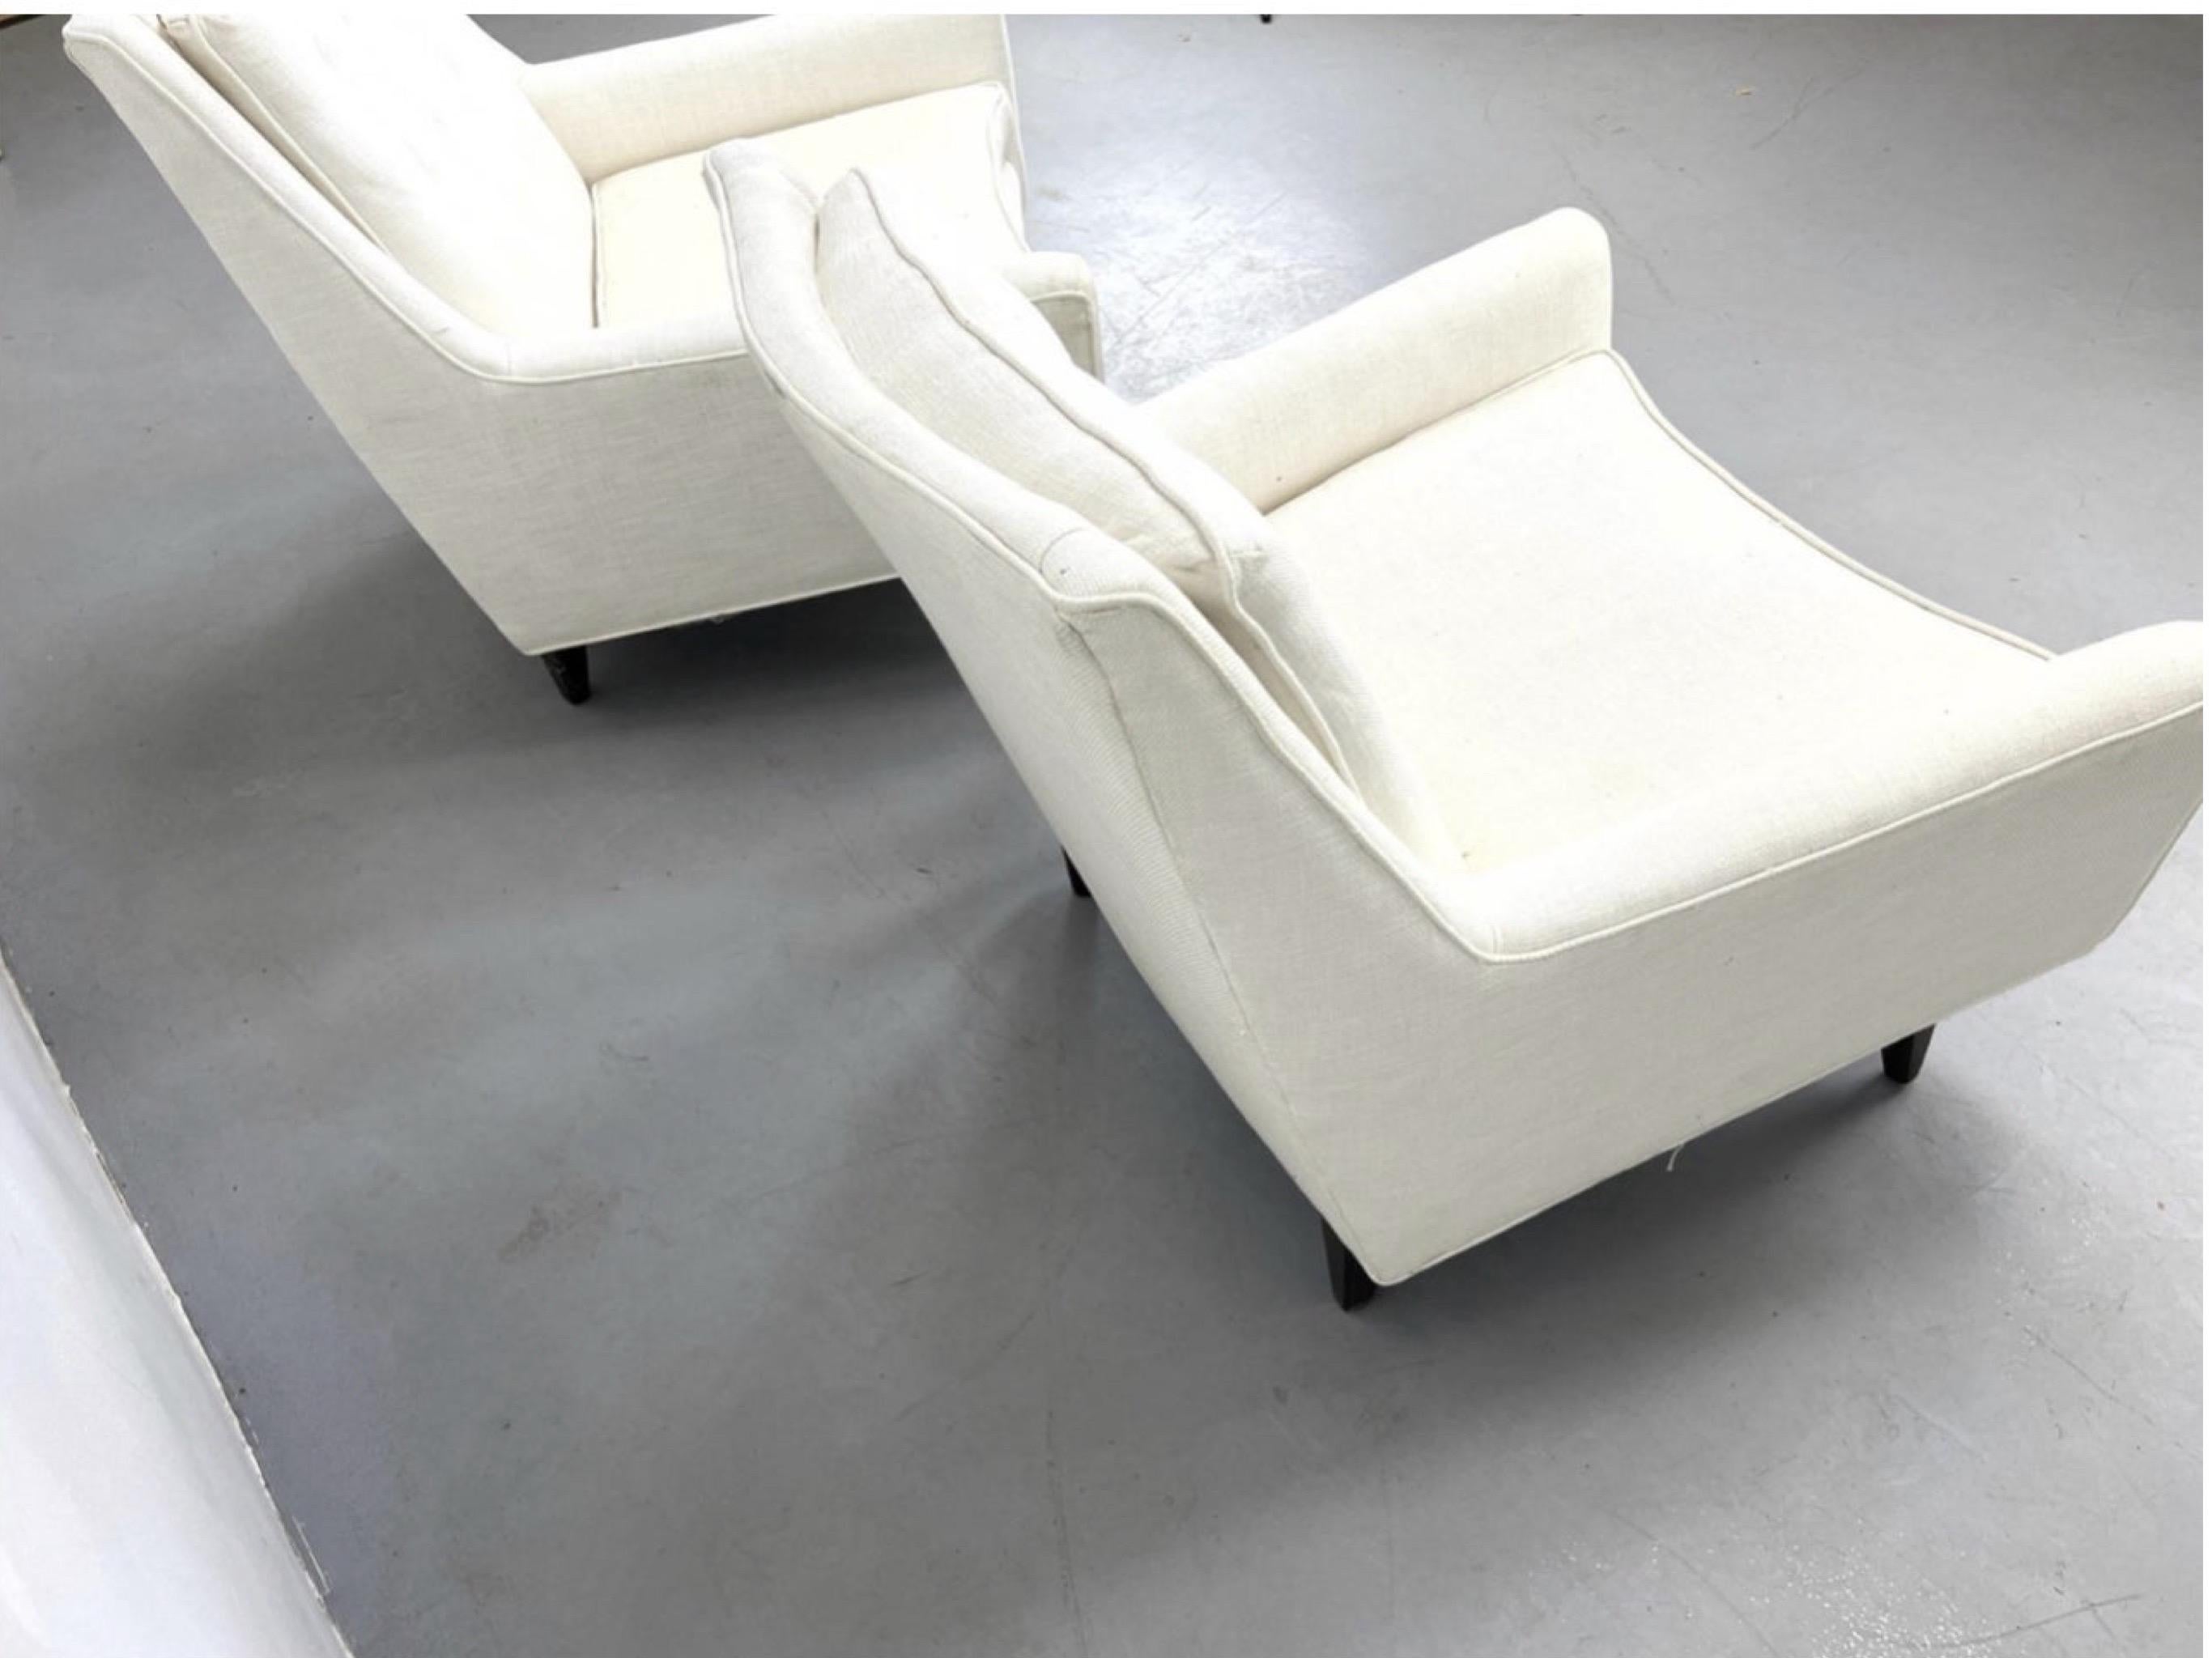 20th Century Edward Wormley Attributed White Upholstered Lounge Chairs - a Pair